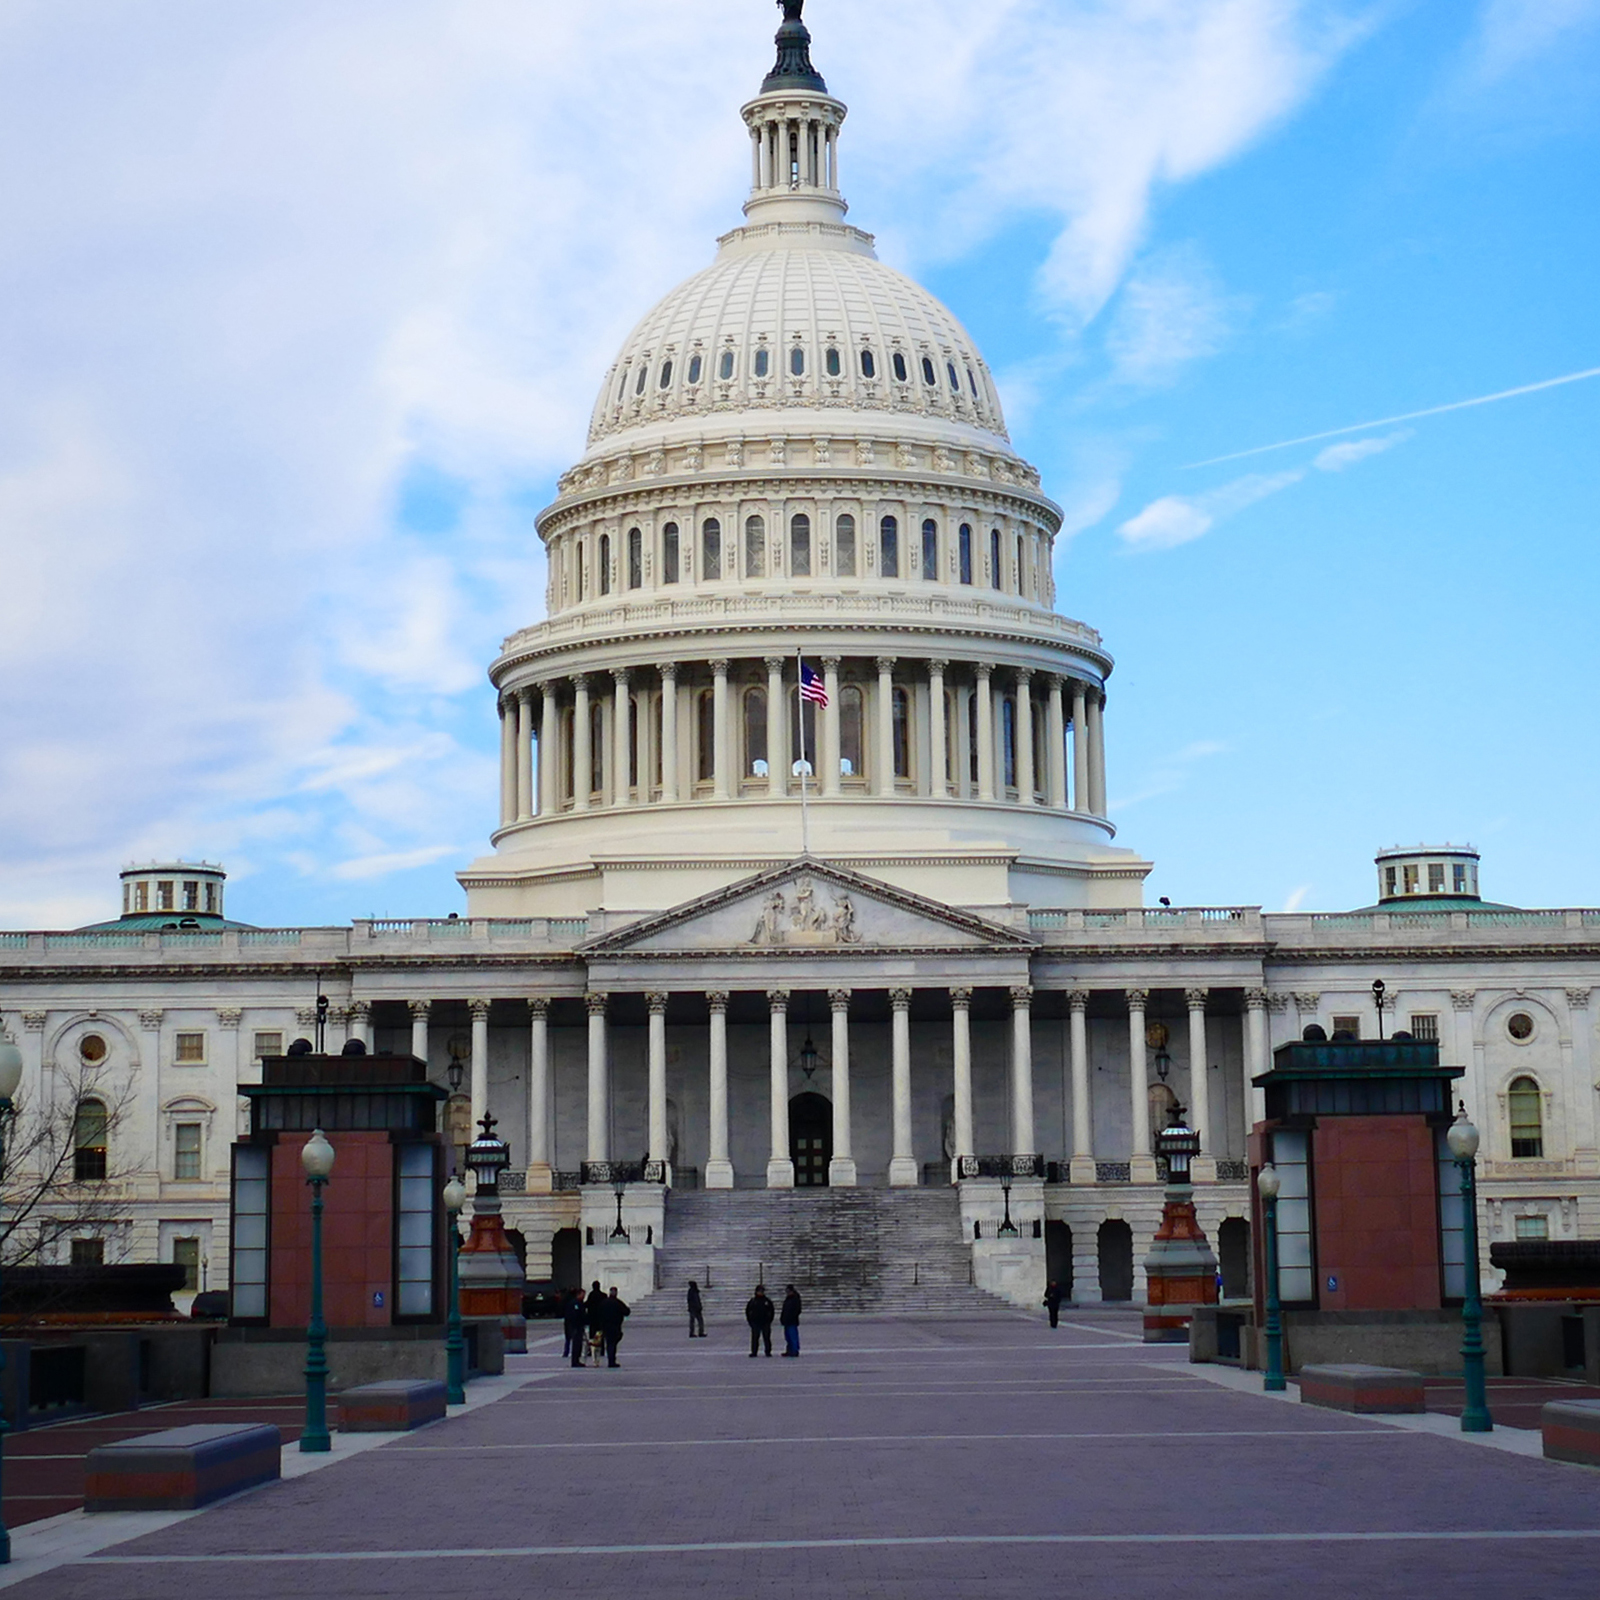 Drafting Laws and 'Hodling': U.S. Congress Discusses Cryptocurrency Disclosure